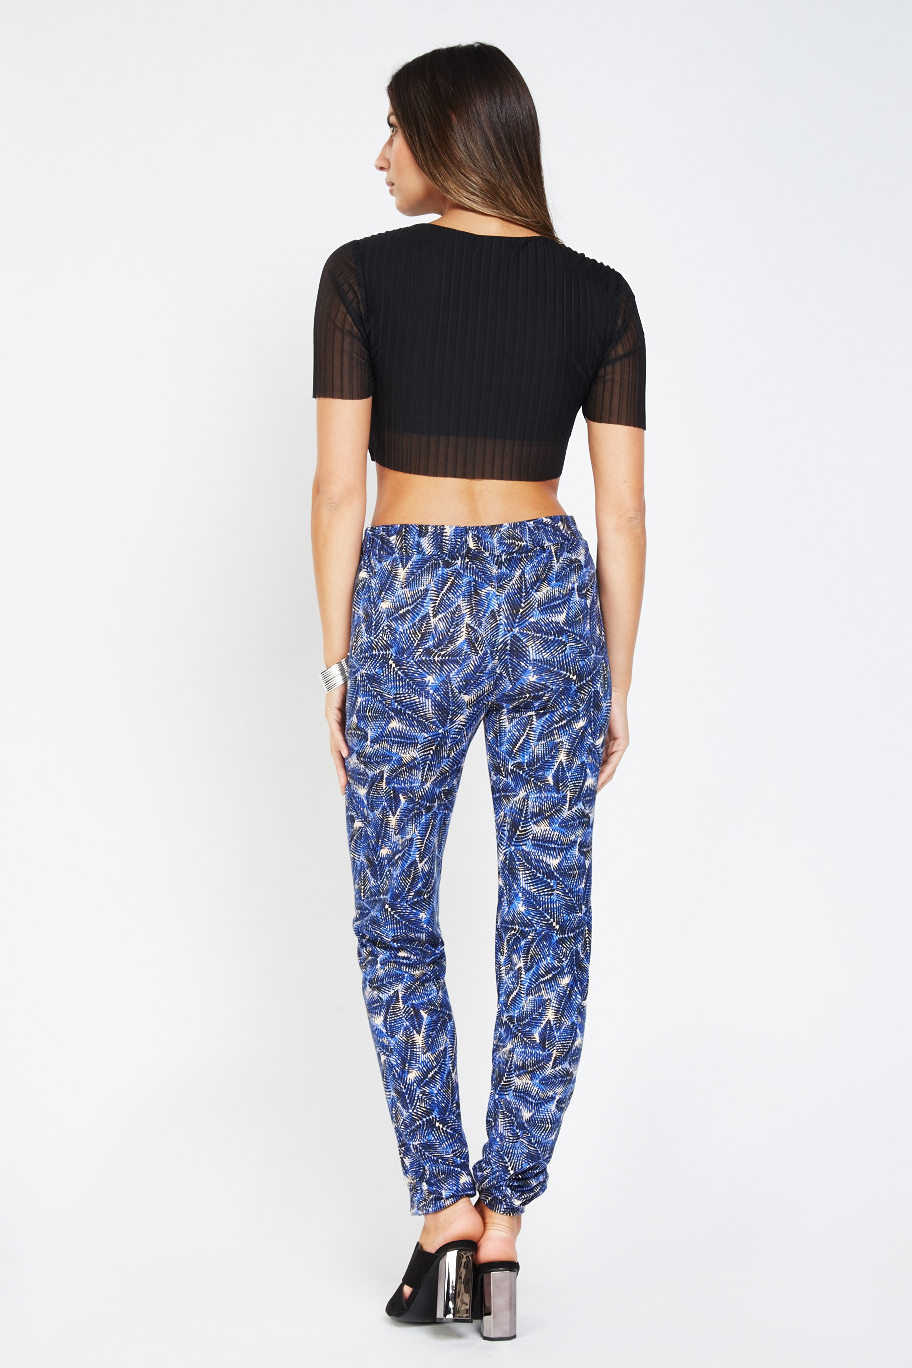 Printed Royal Blue Light Trousers - Just $3